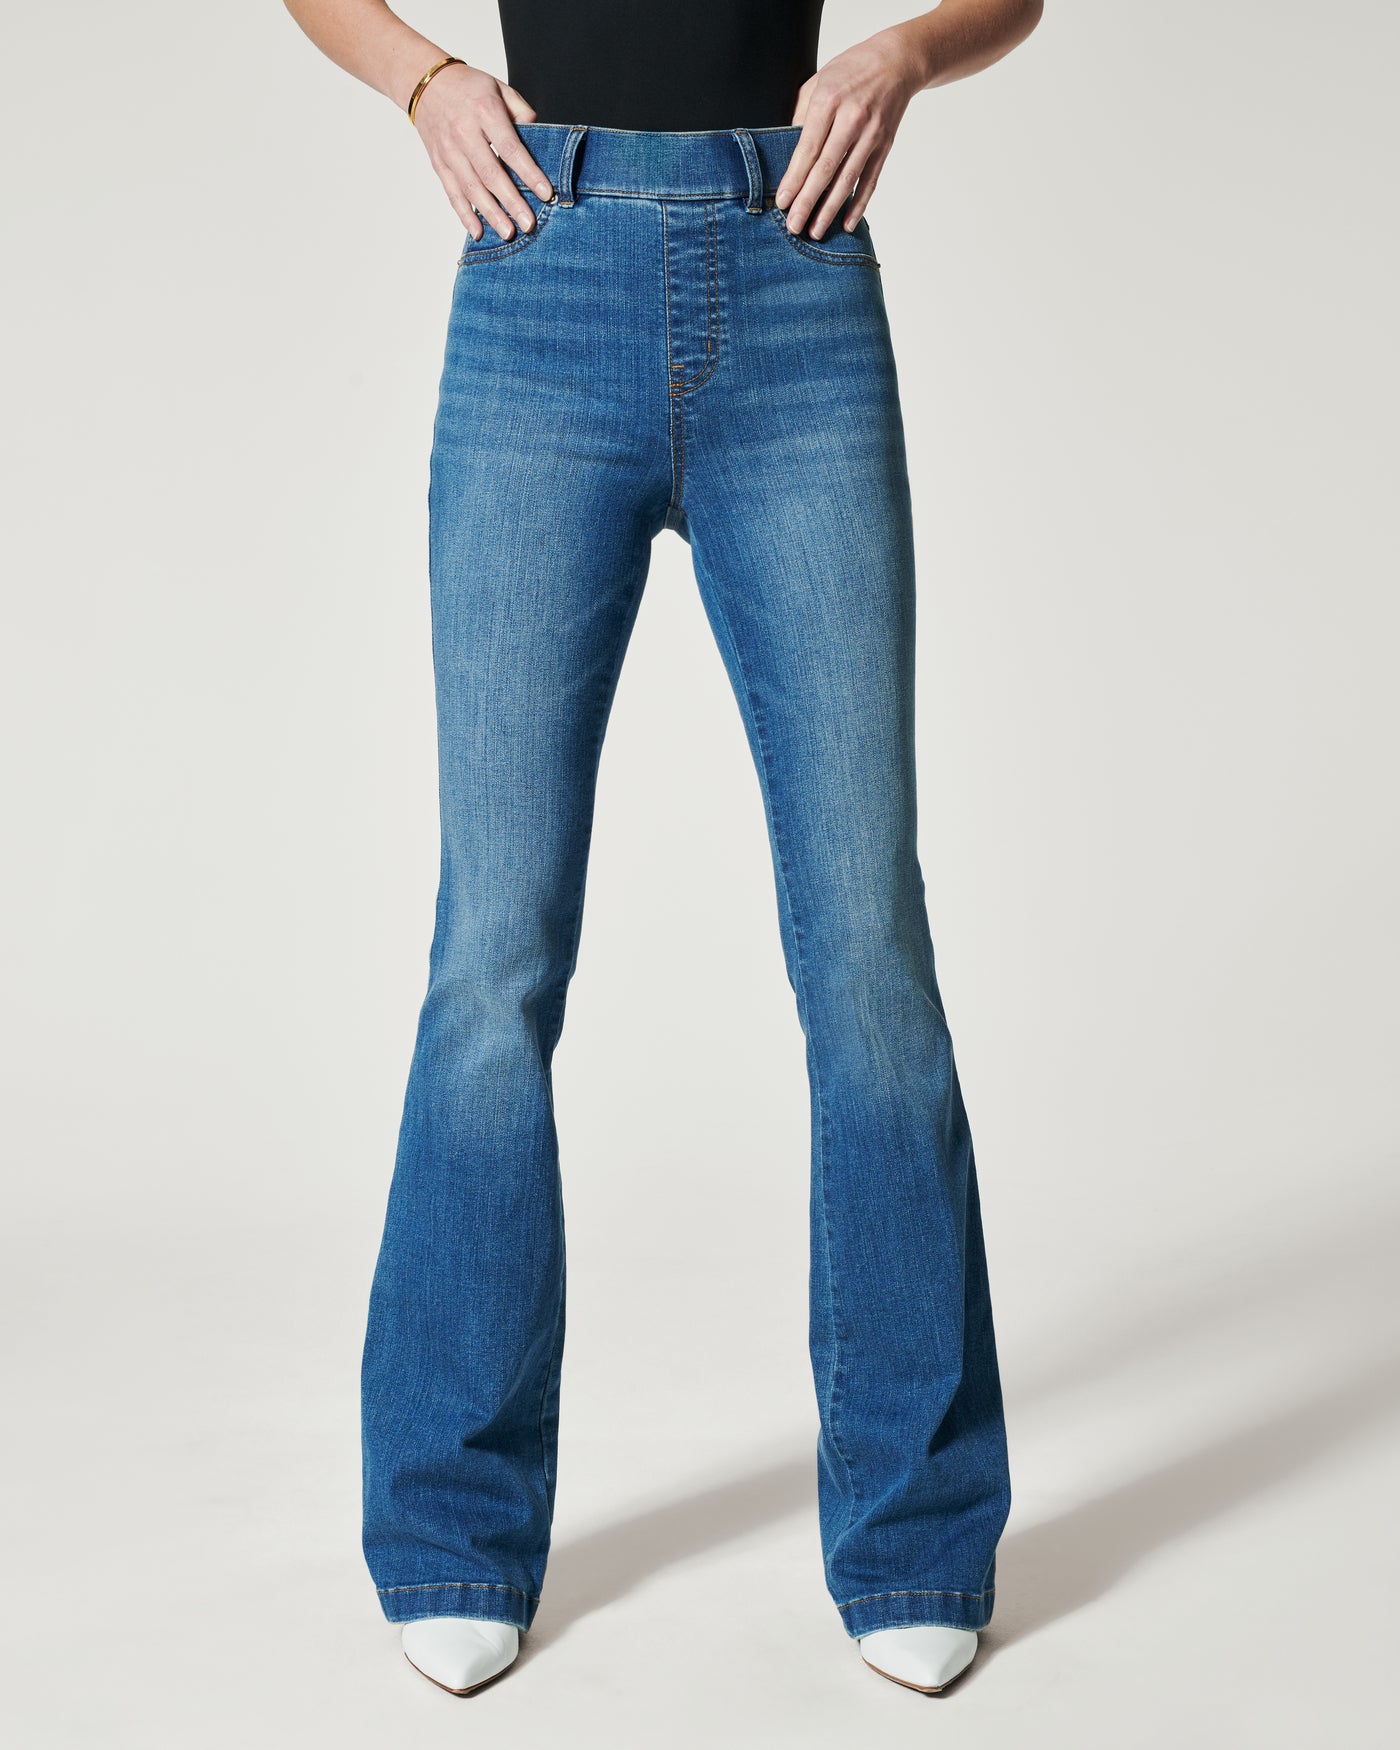 Spanx Flare Jeans in vintage indigo on model front view.